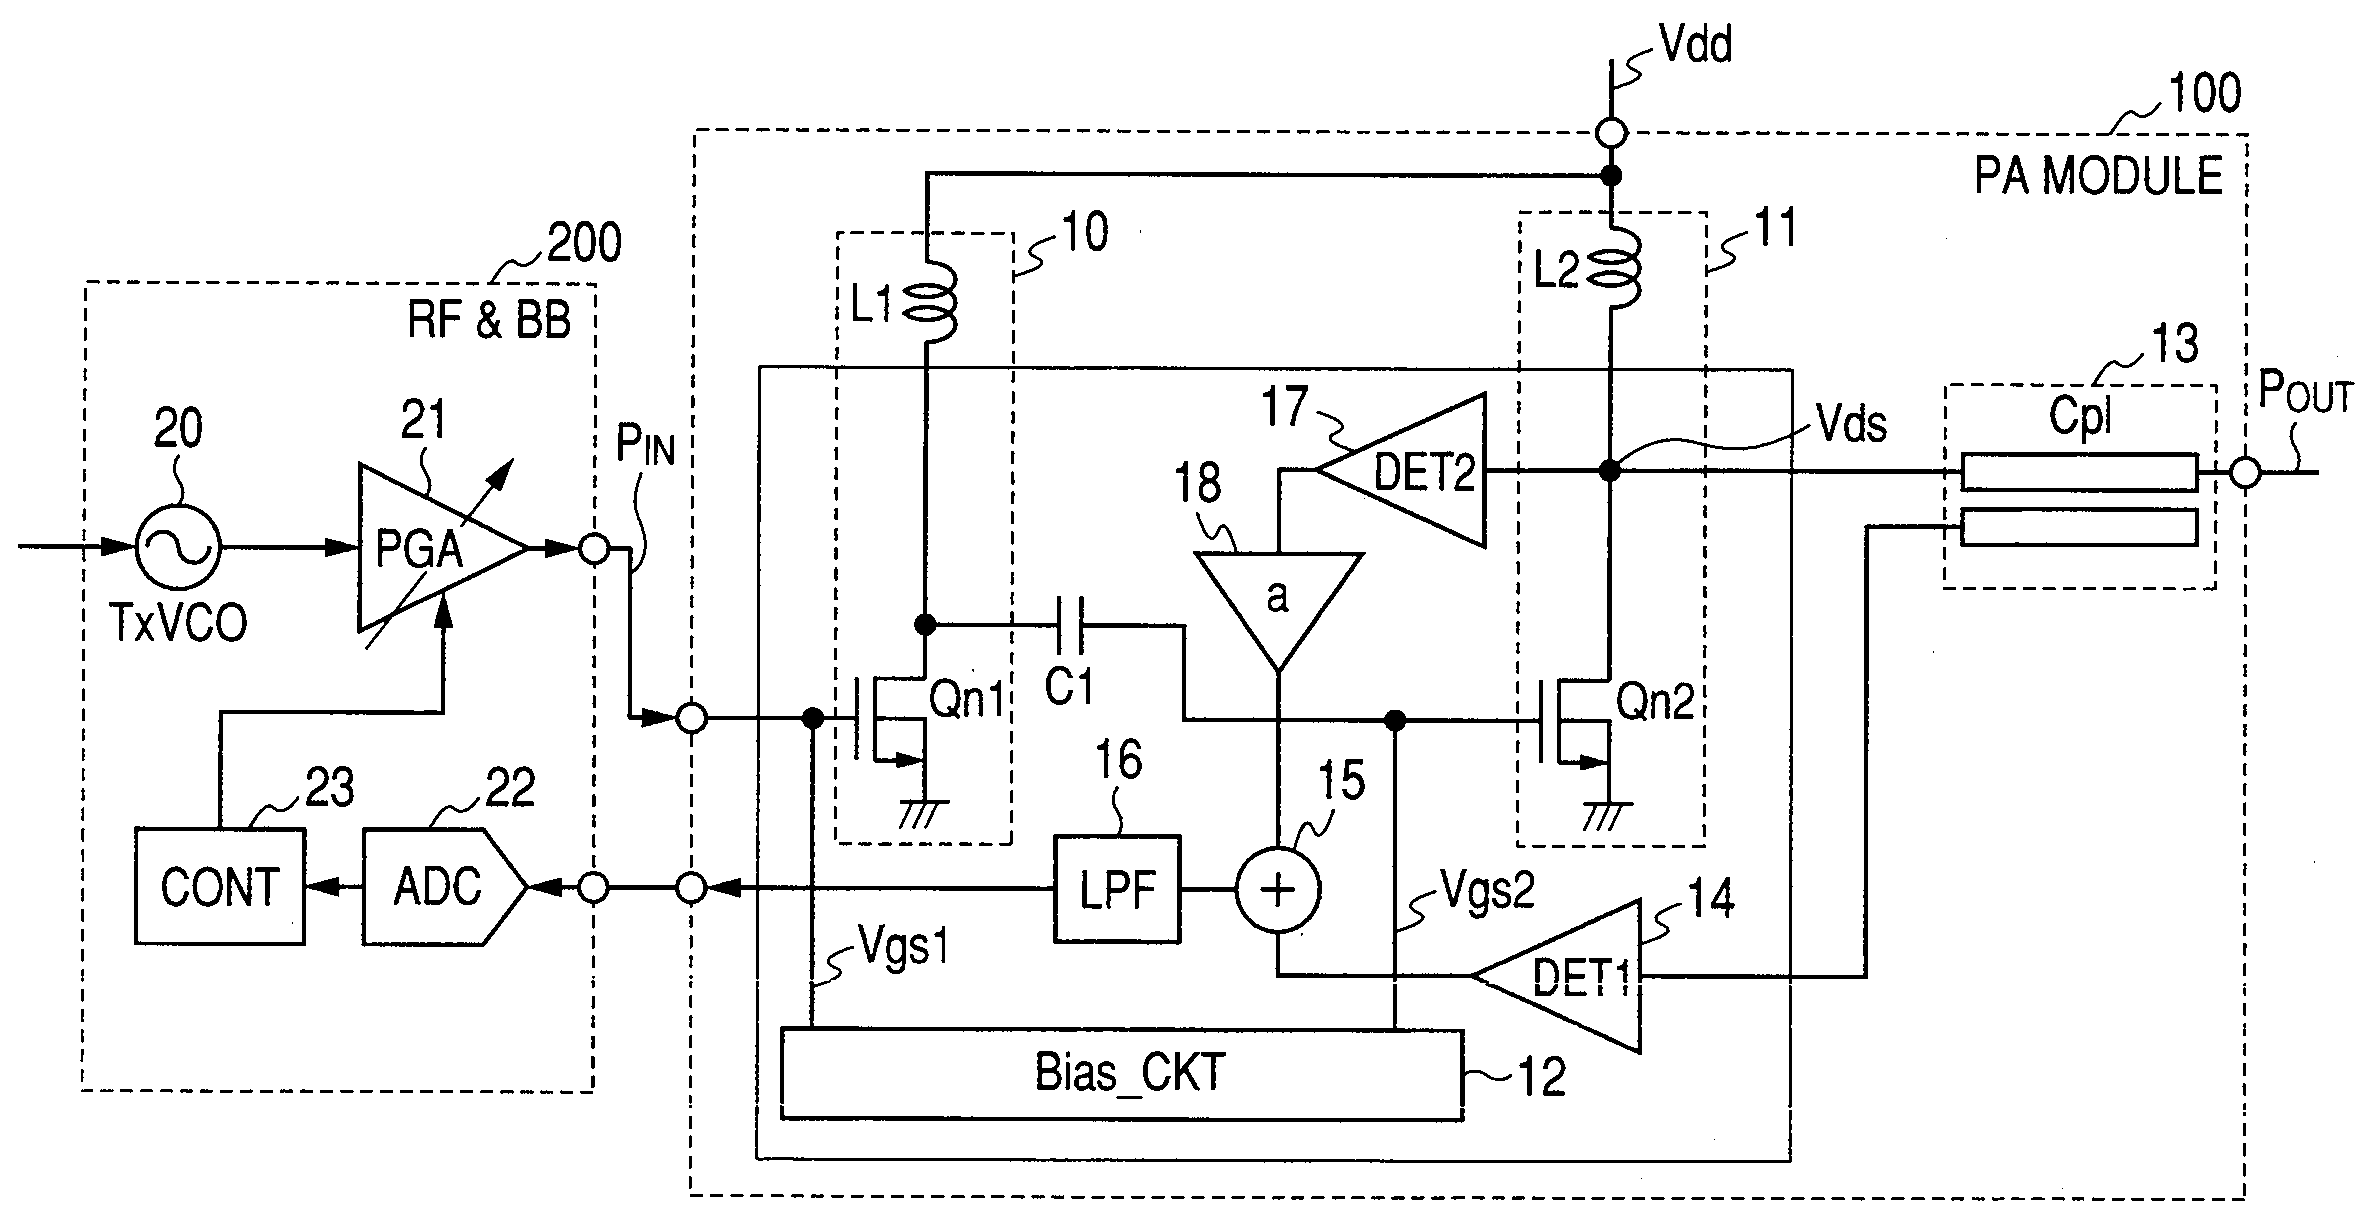 Radio frequency (RF) power amplifier and RF power amplifier apparatus